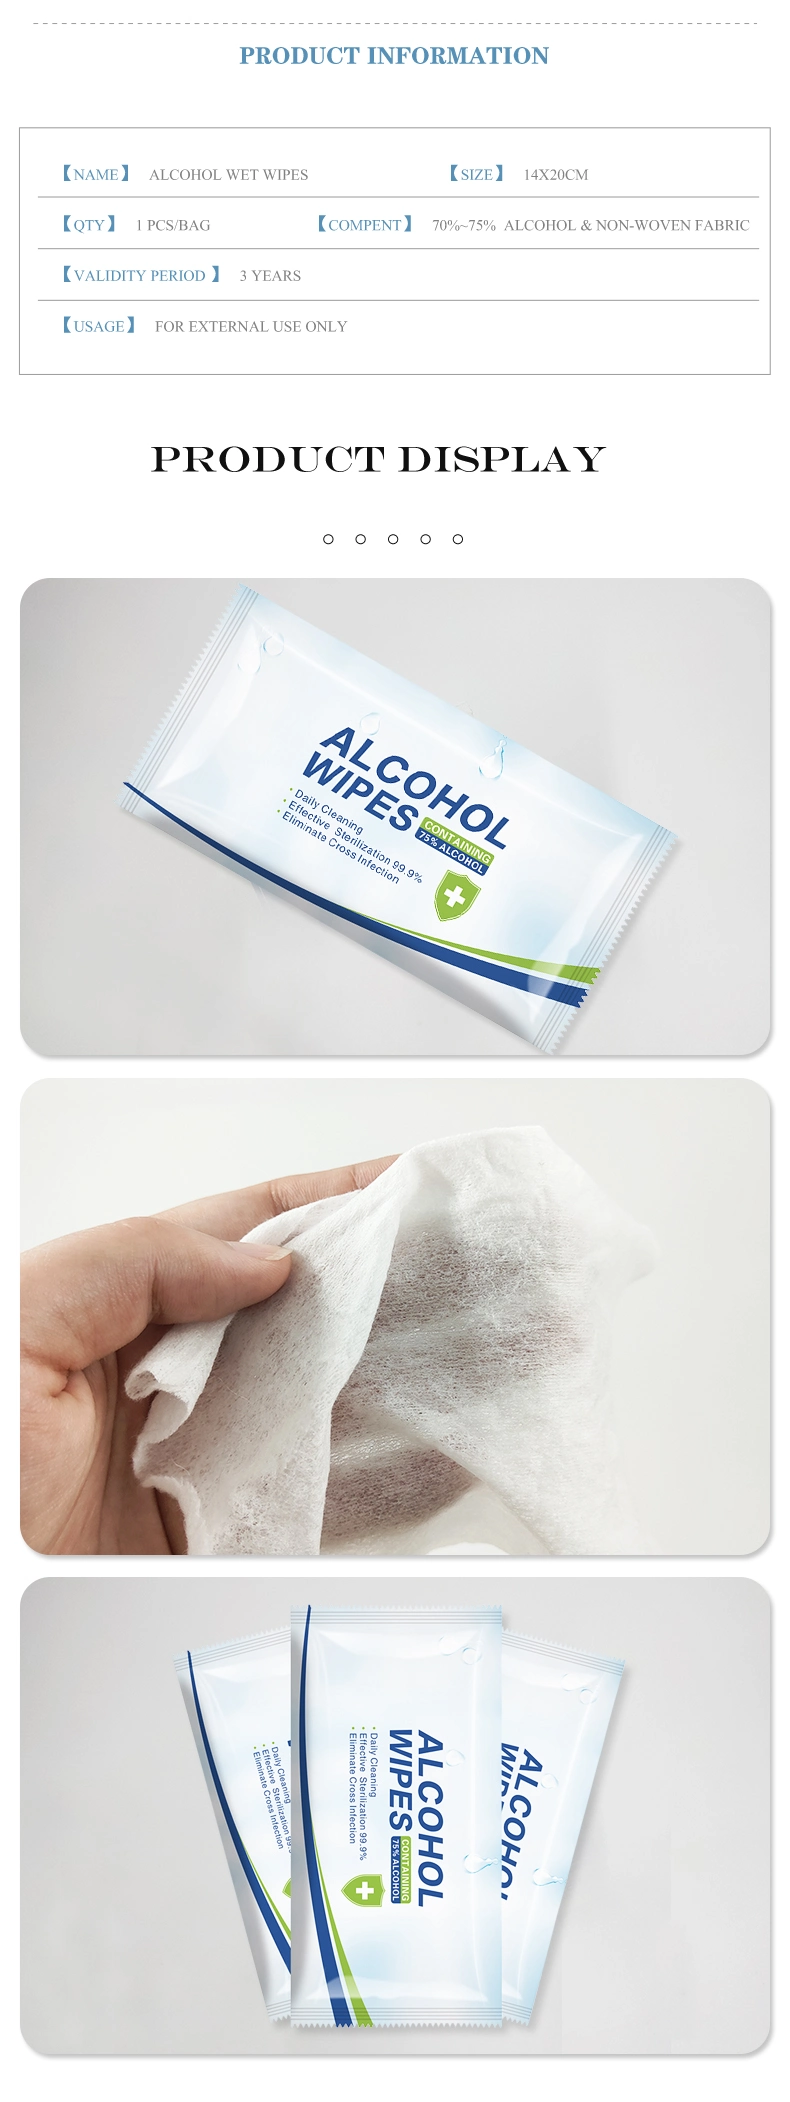 in Pouch, OEM Factory, Antibacterial Wipes, Alcohol Wipes for All Hardsurface